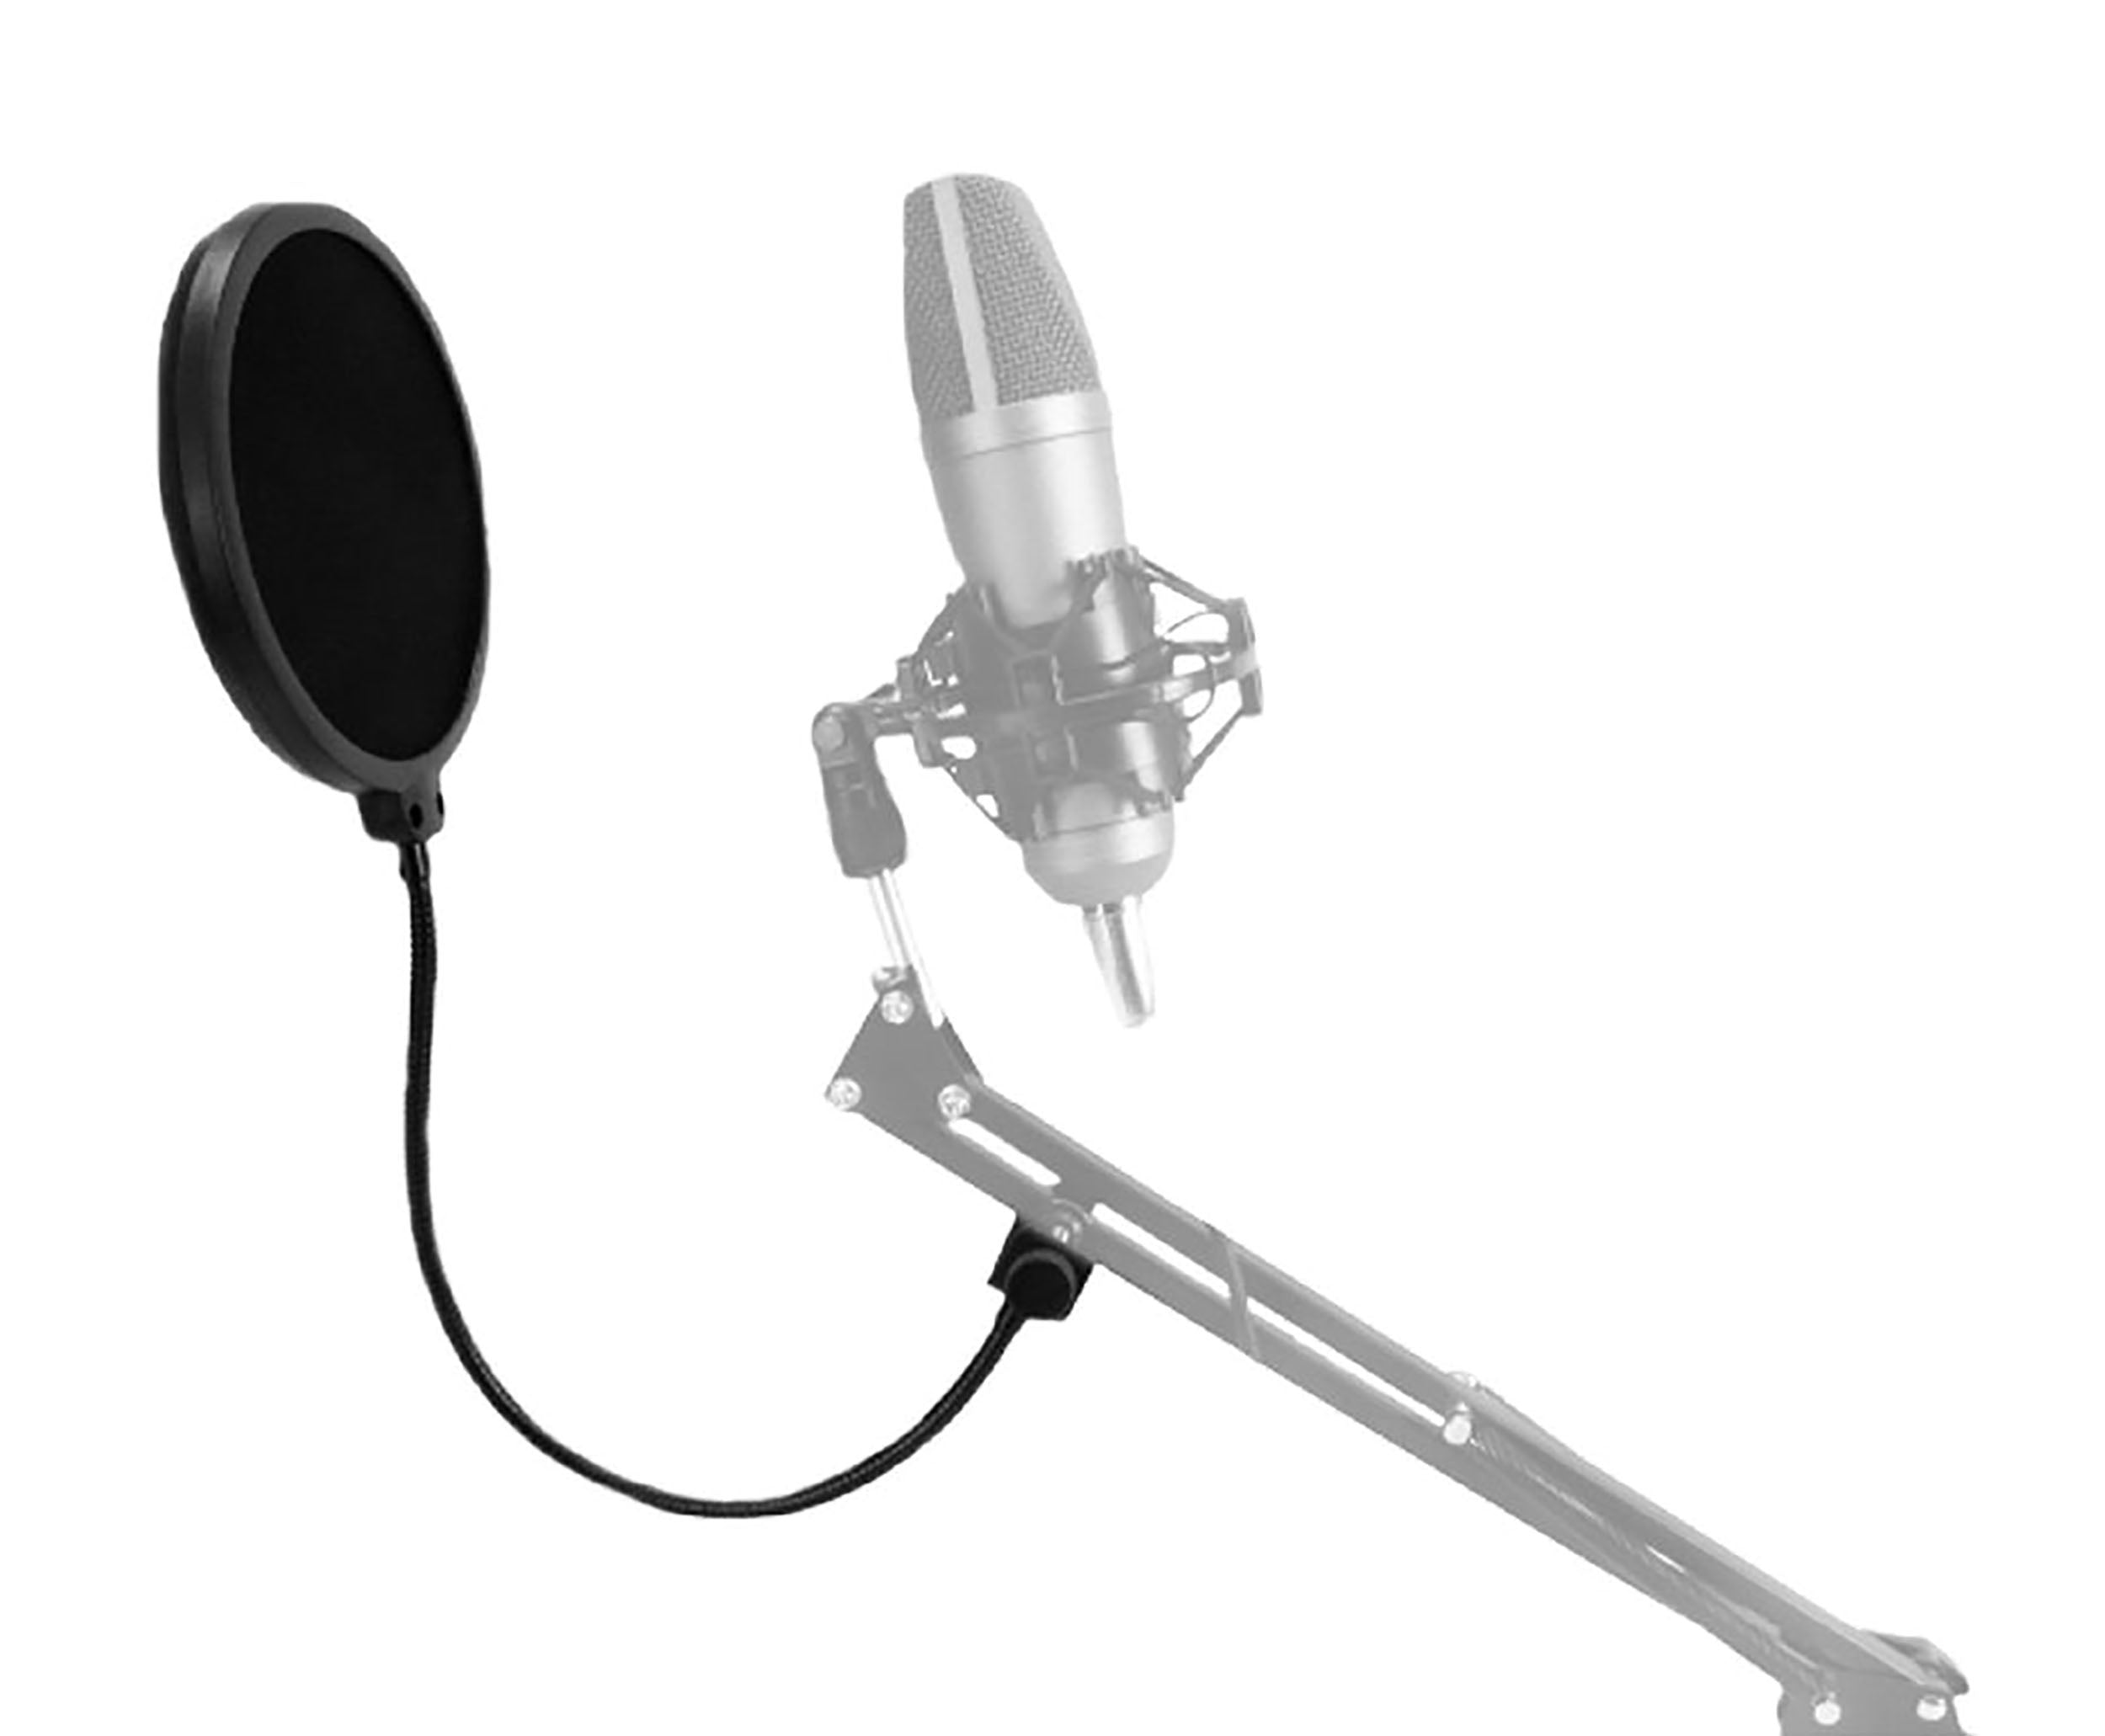 Technical Pro MKPF2, 6'' Clamp on Microphone Pop Filter with 10" Arm by Technical Pro